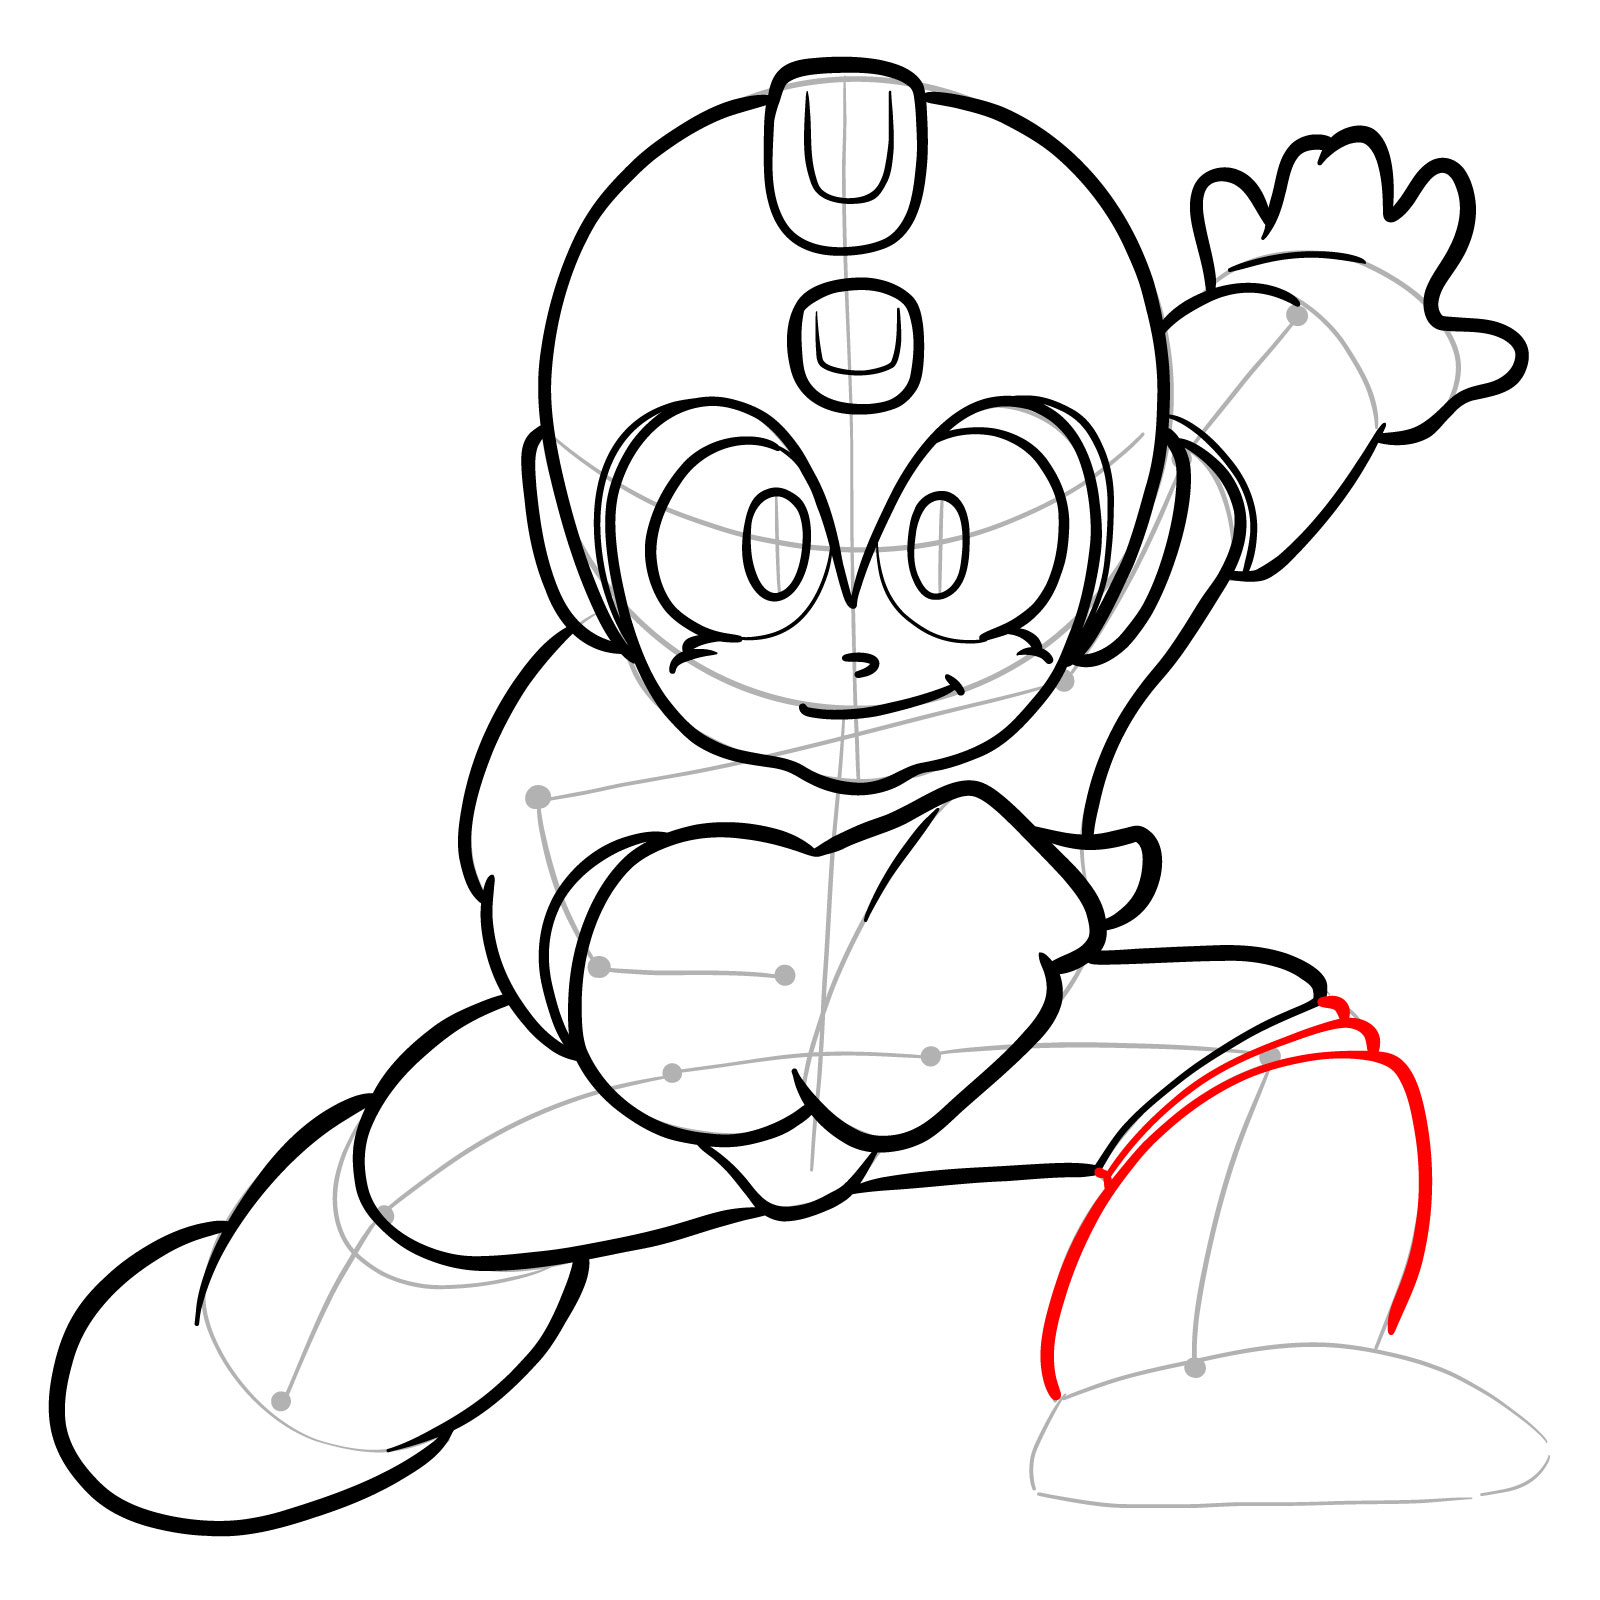 How to draw Mega Man from the original game - step 23